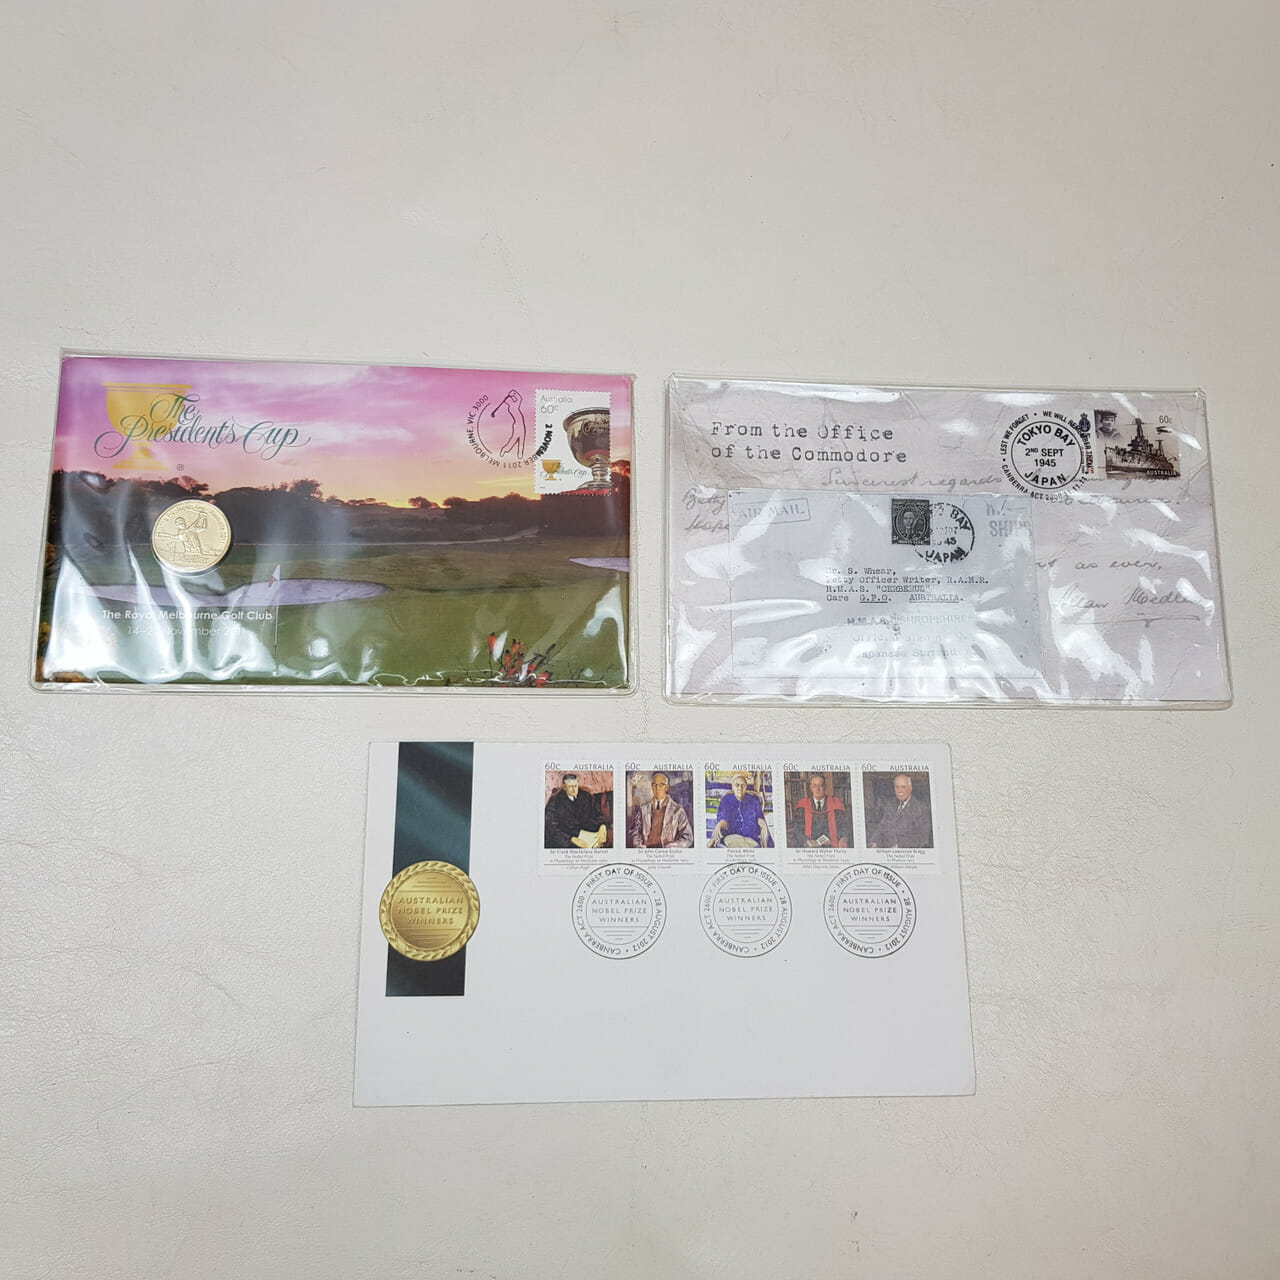 AUSTRALIA POST STAMPED ENVELOPES & PRESIDENTS CUP GOLF COINS #54295